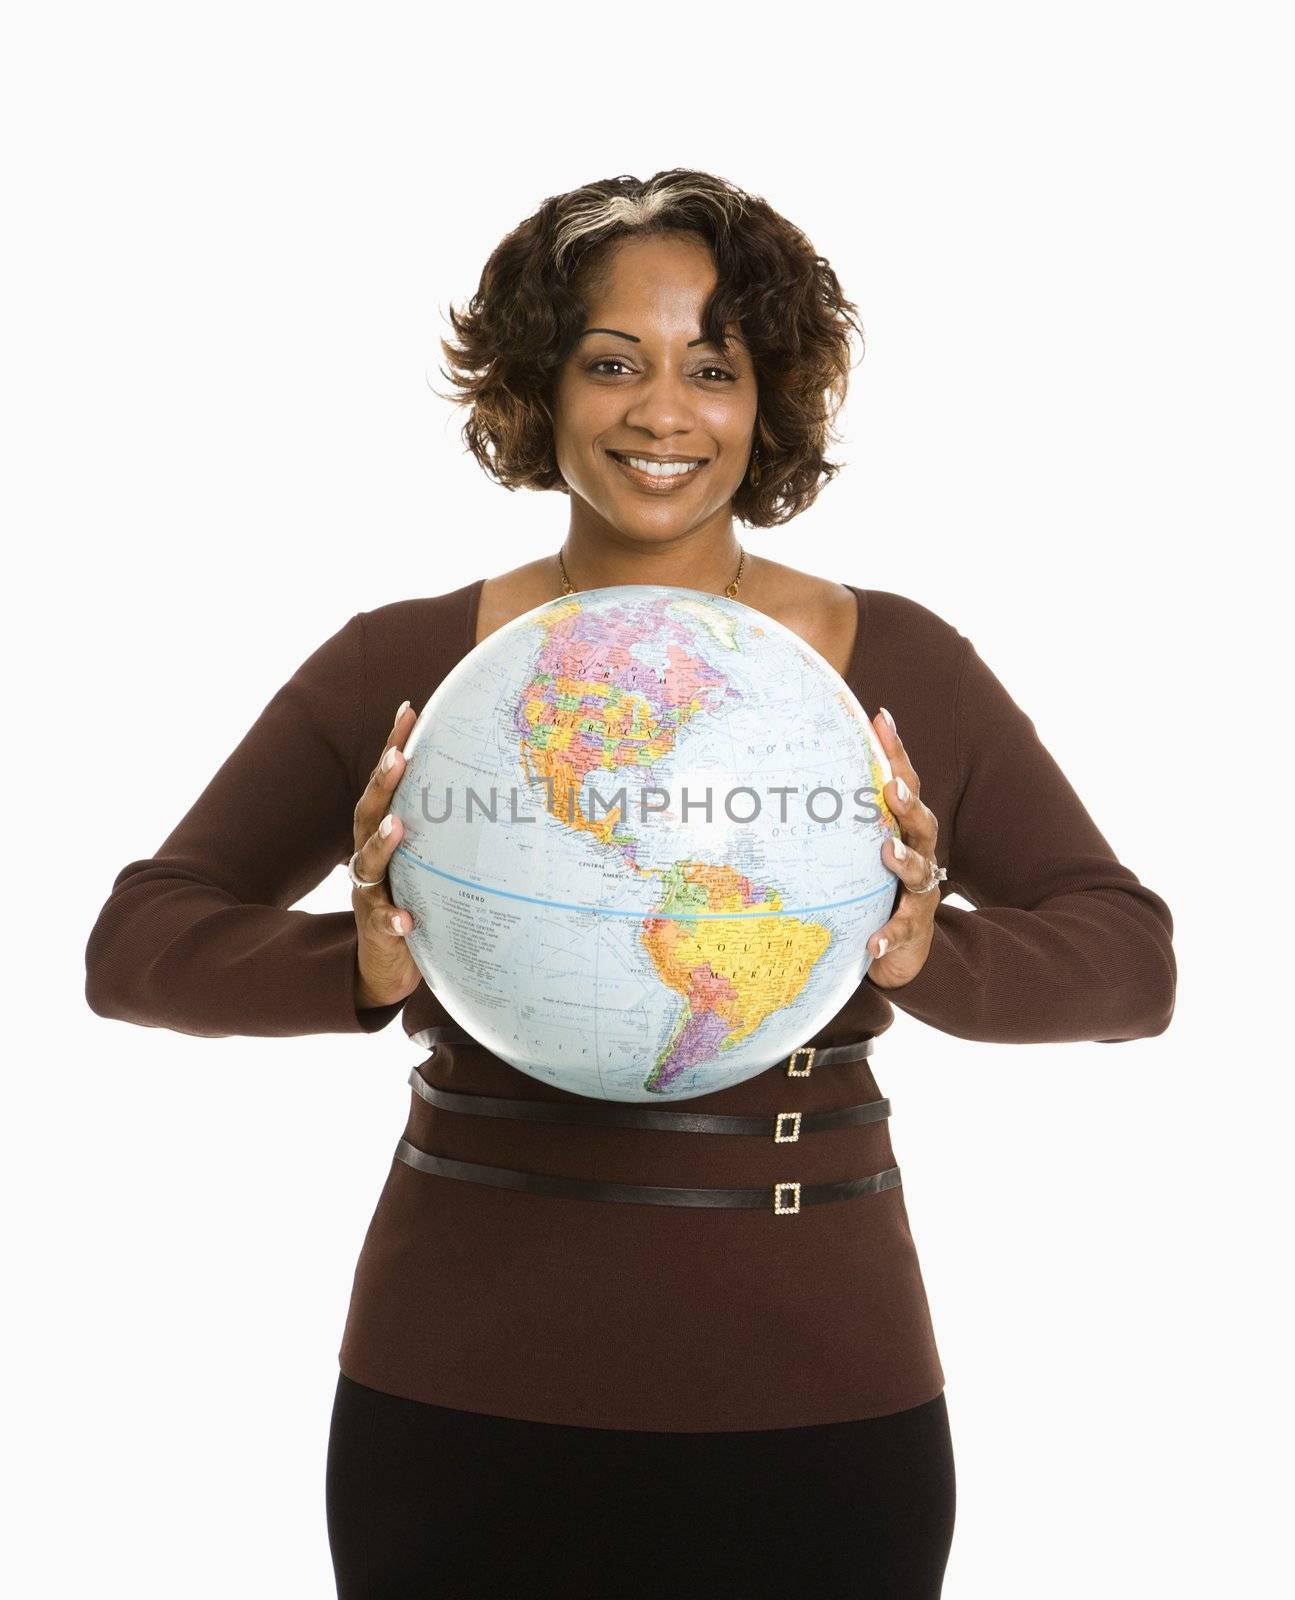 Smiling woman holding earth globe.